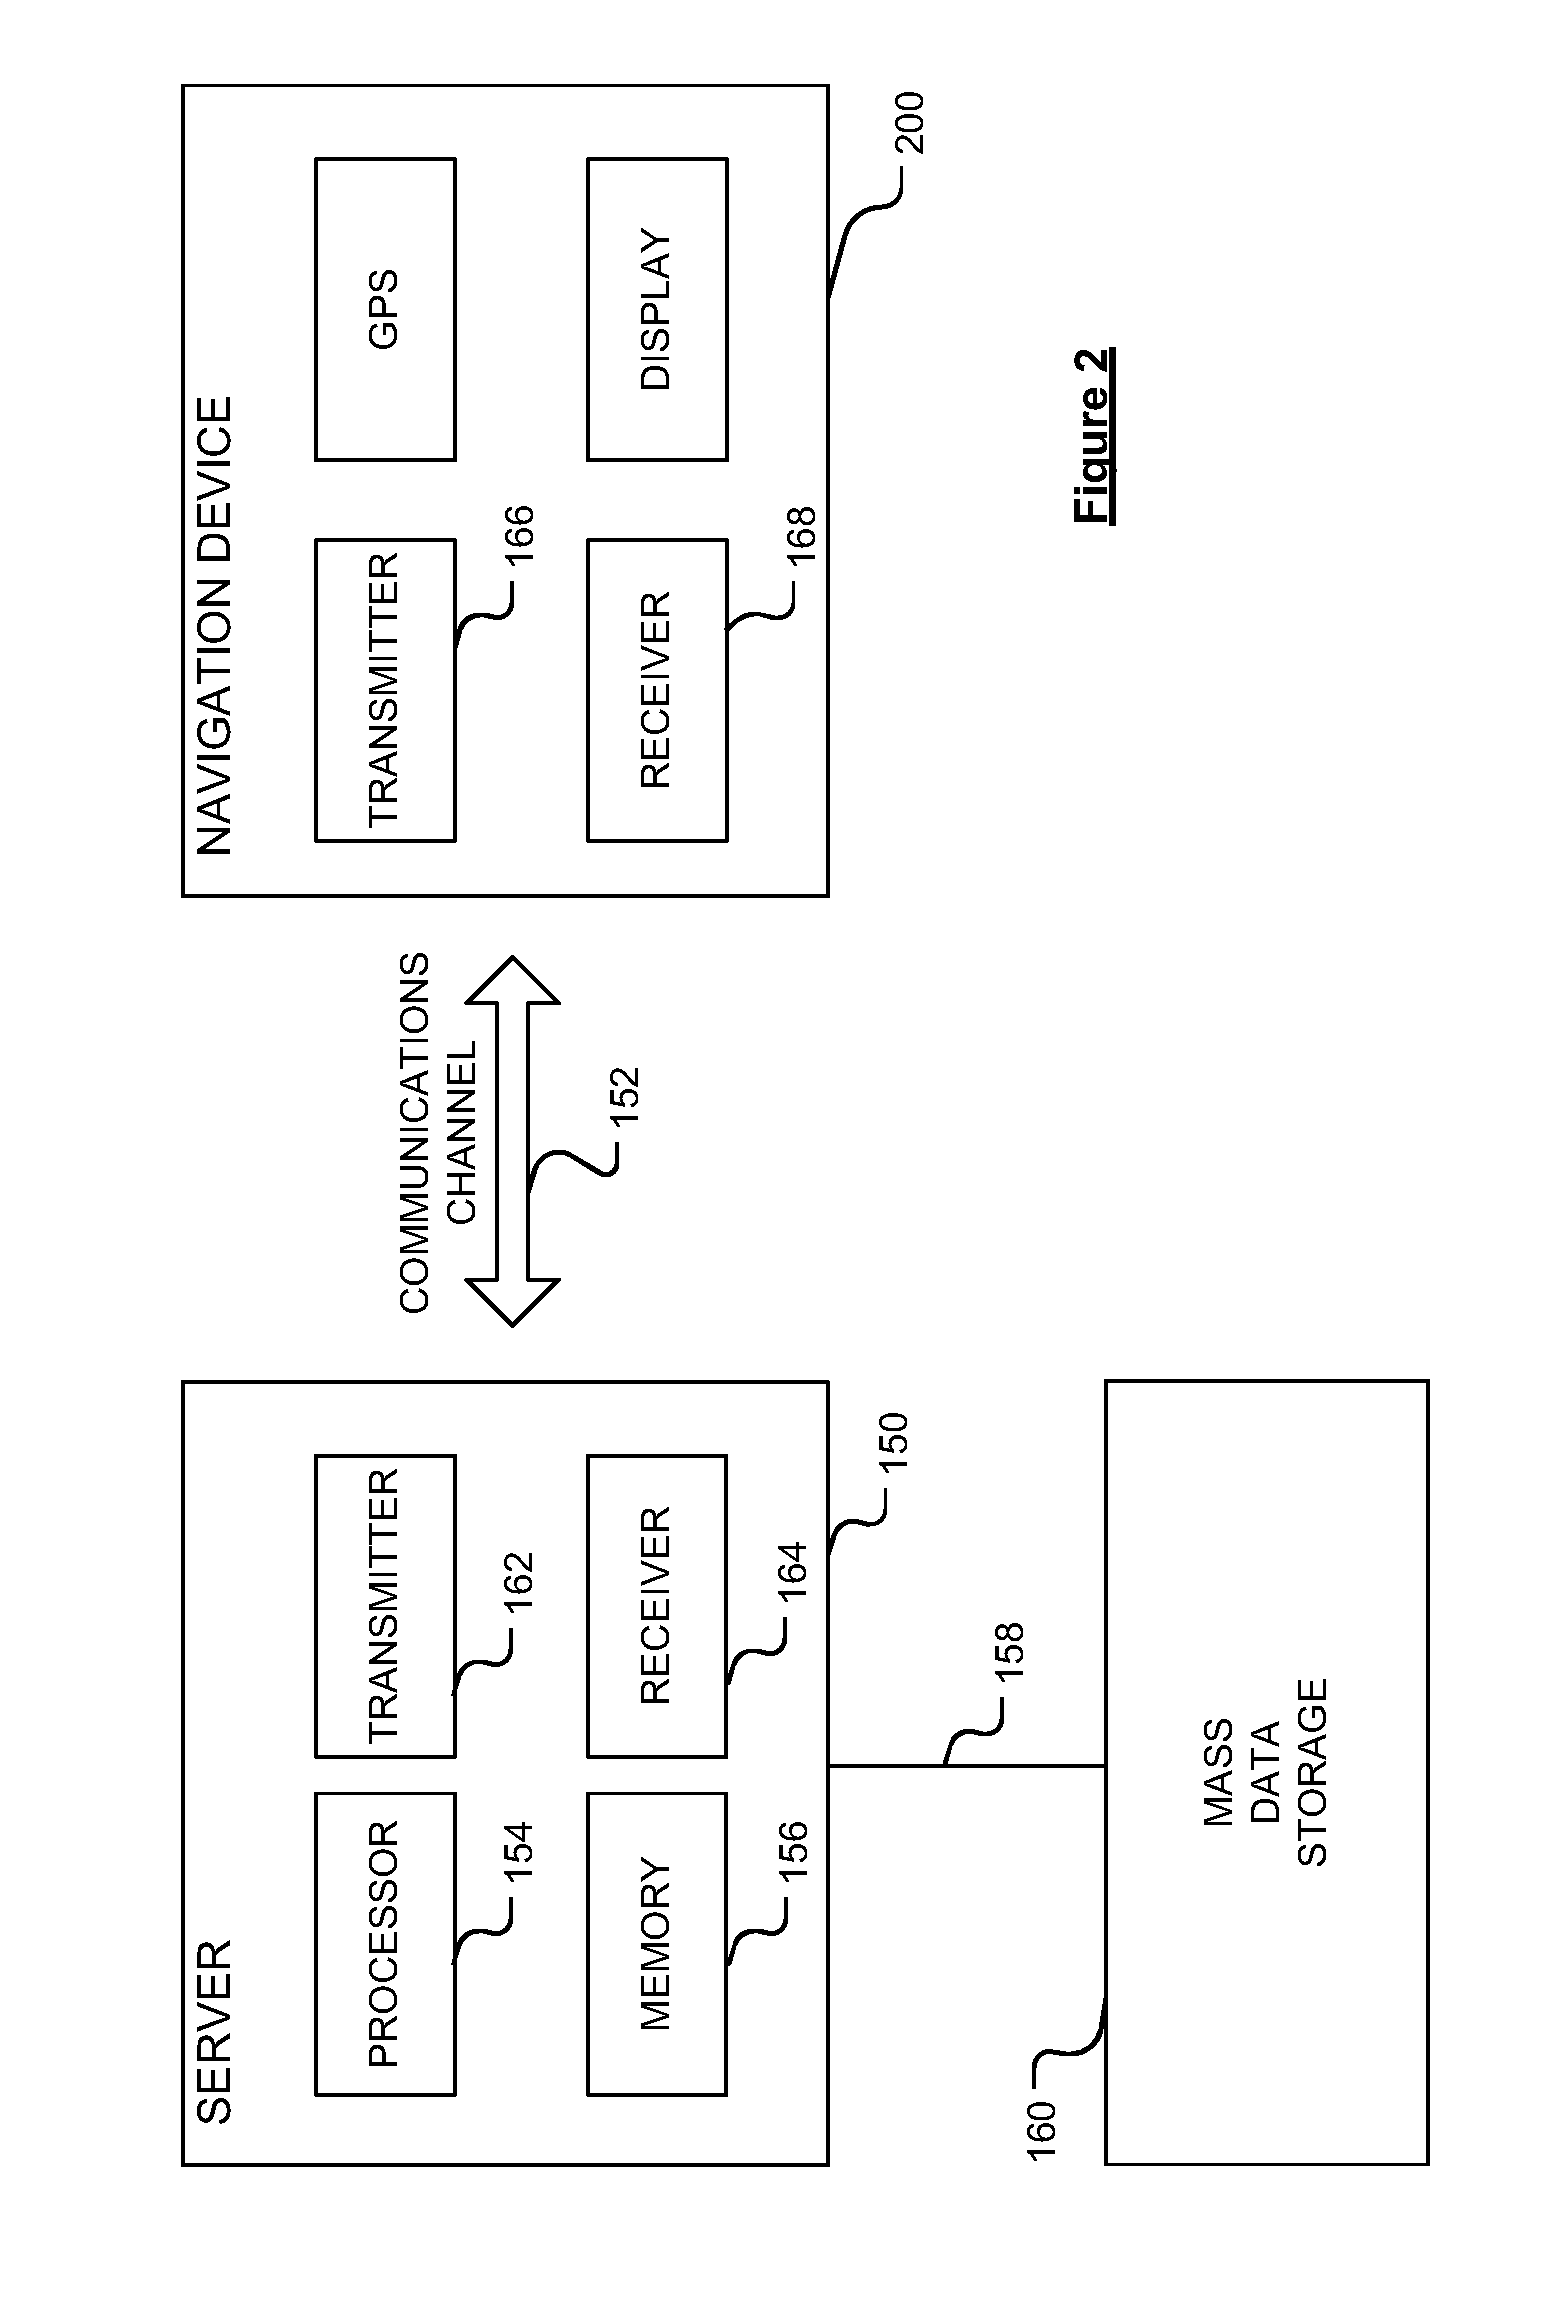 Navigation apparatus used in-vehicle